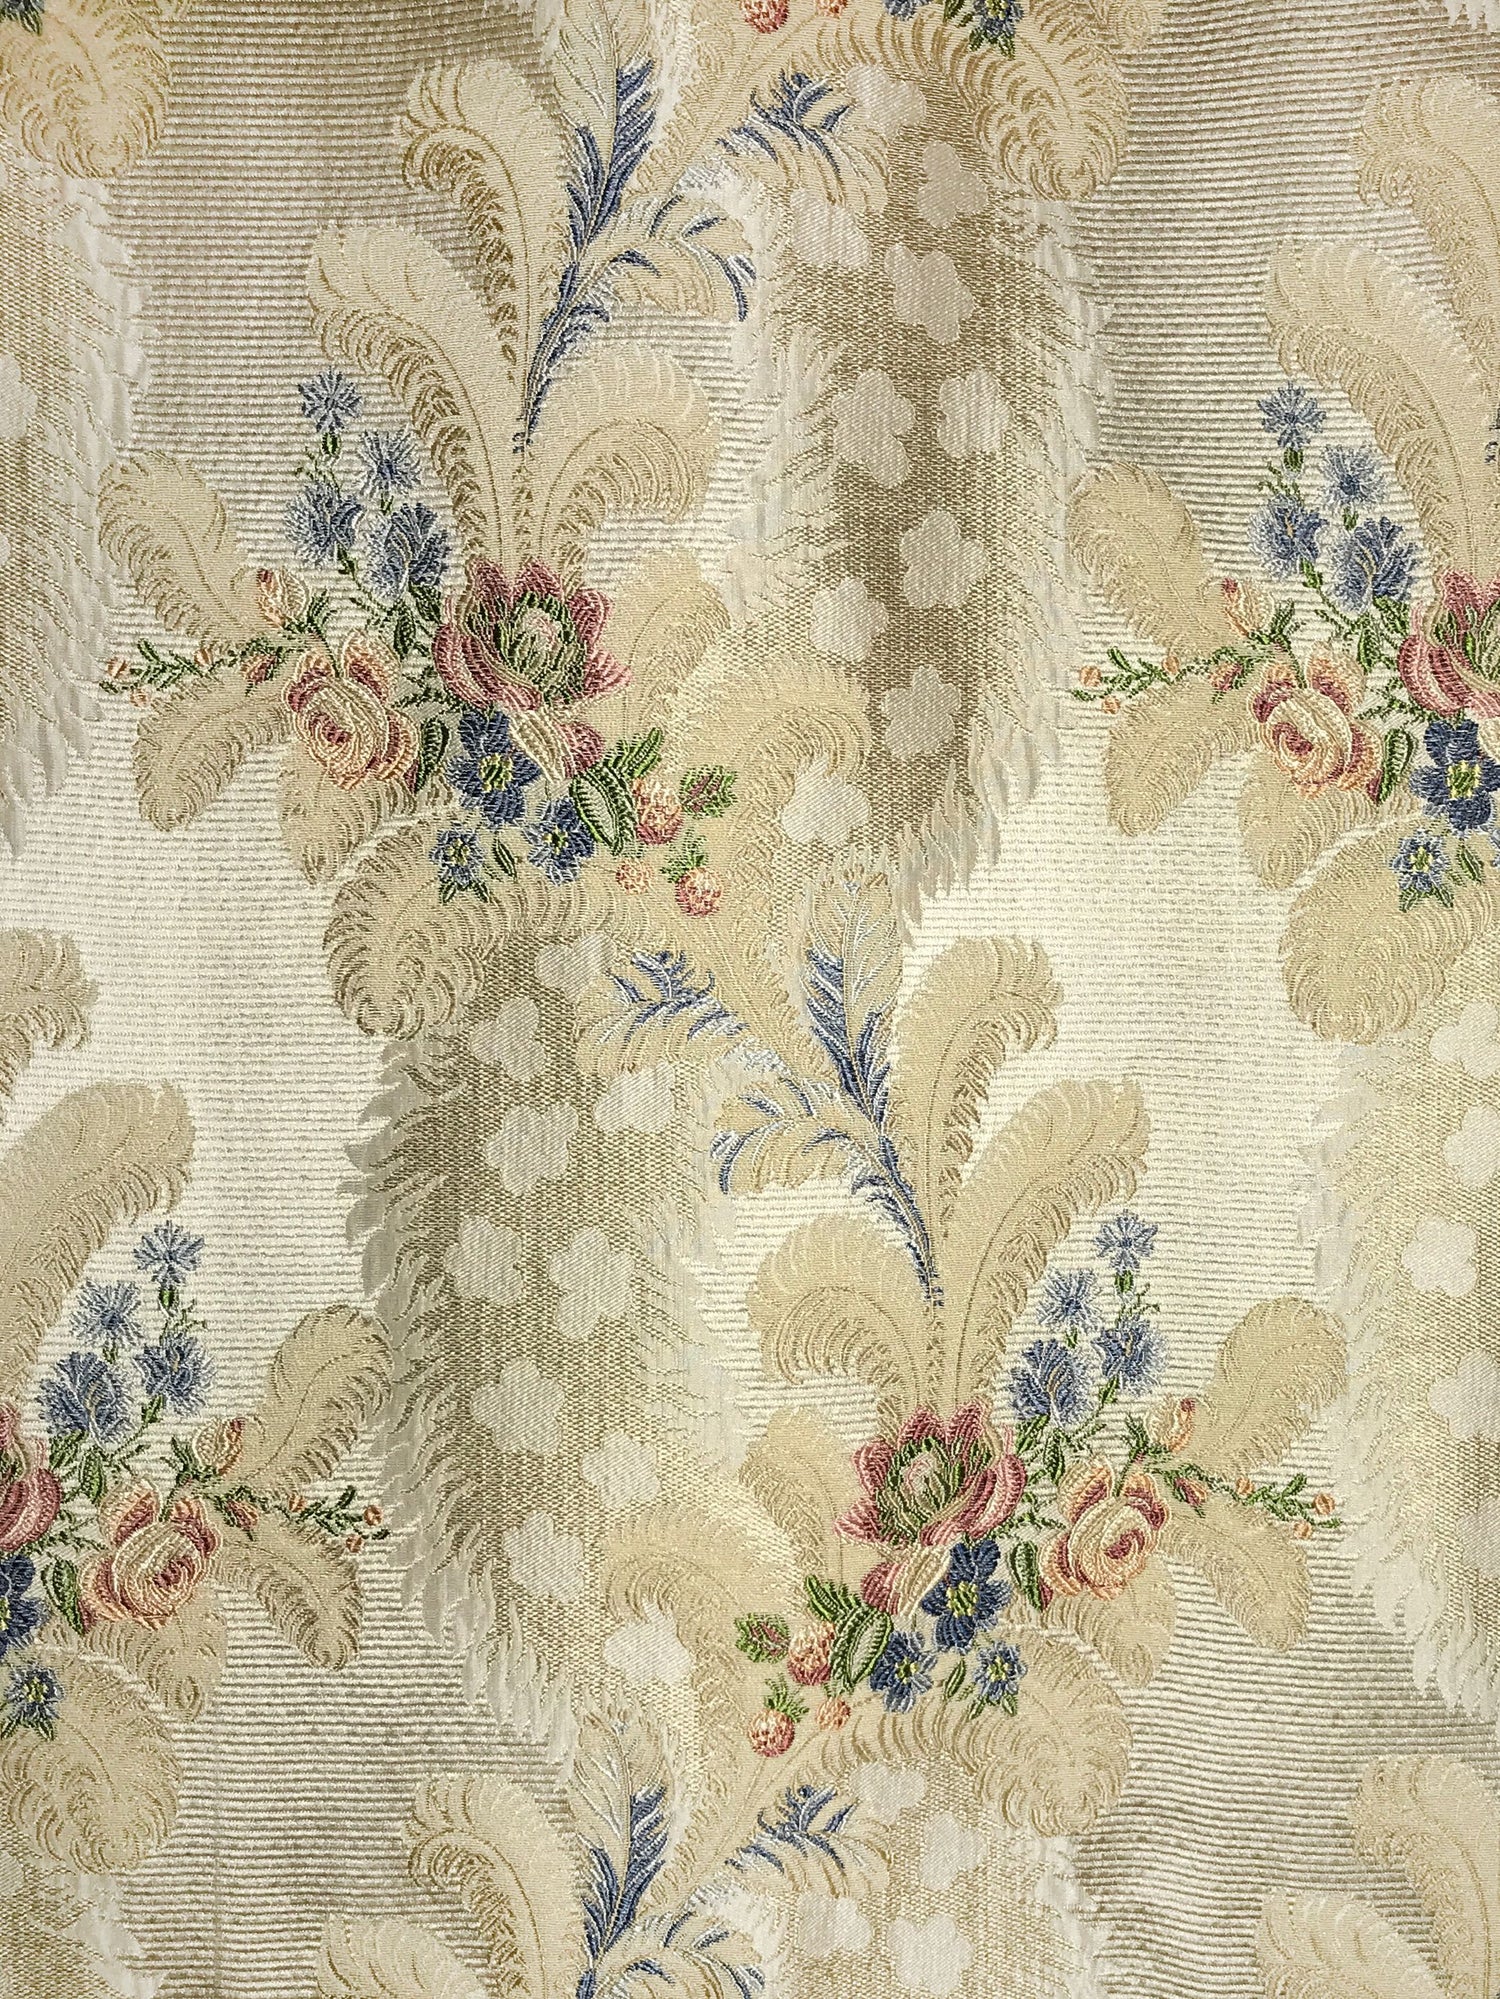 Cheverny fabric in rose, blue, ivory color - pattern number SB 00060289 - by Scalamandre in the Old World Weavers collection